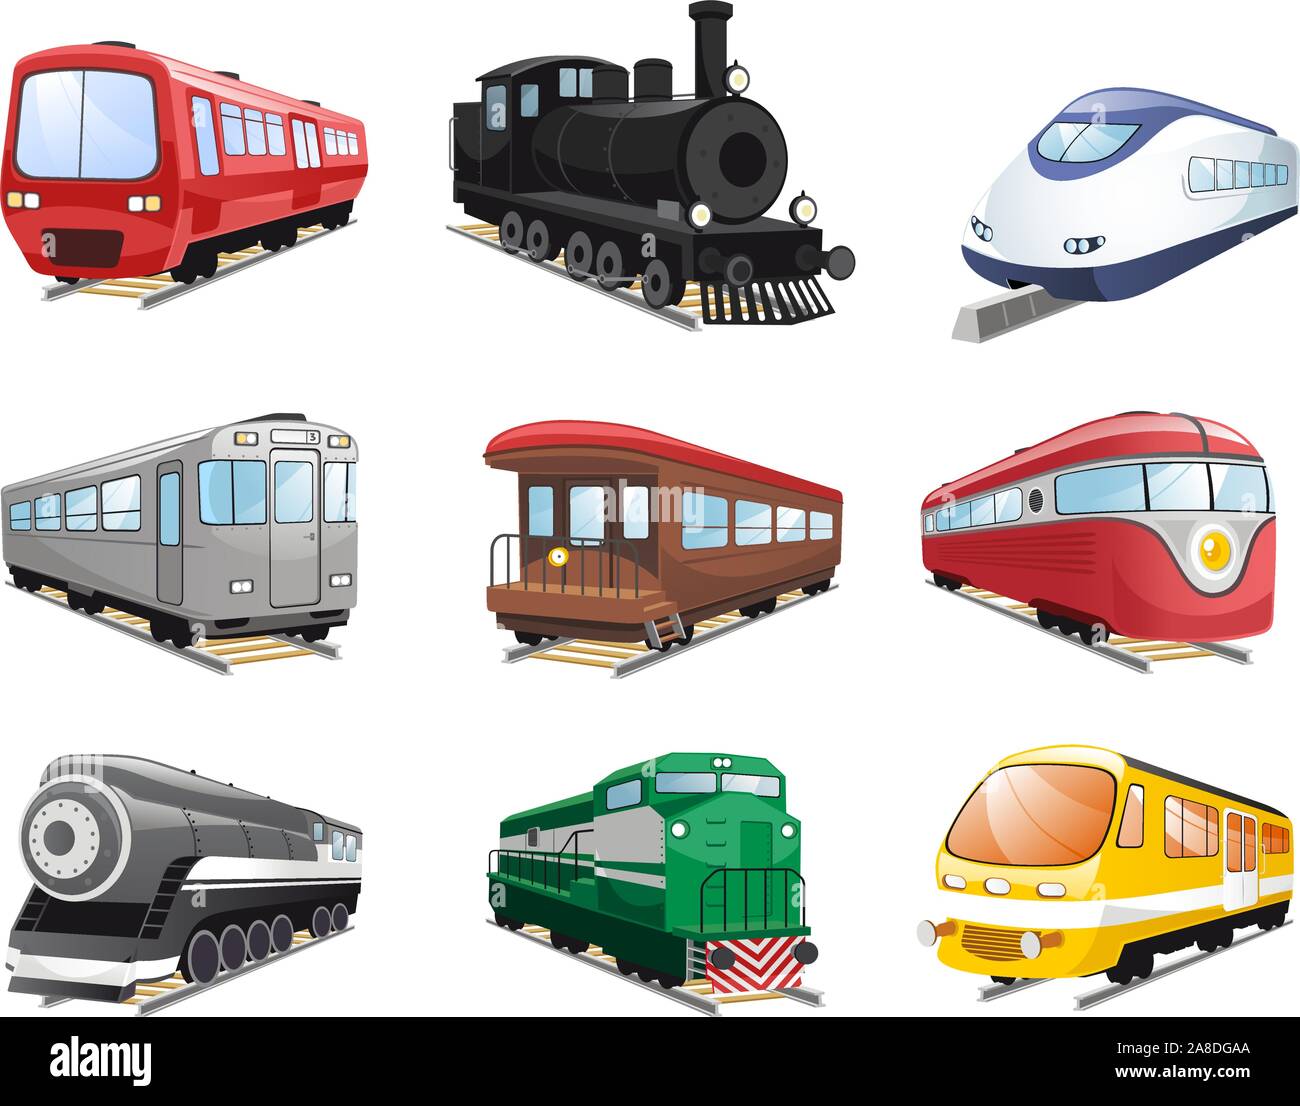 Steam train painting Stock Vector Images - Alamy